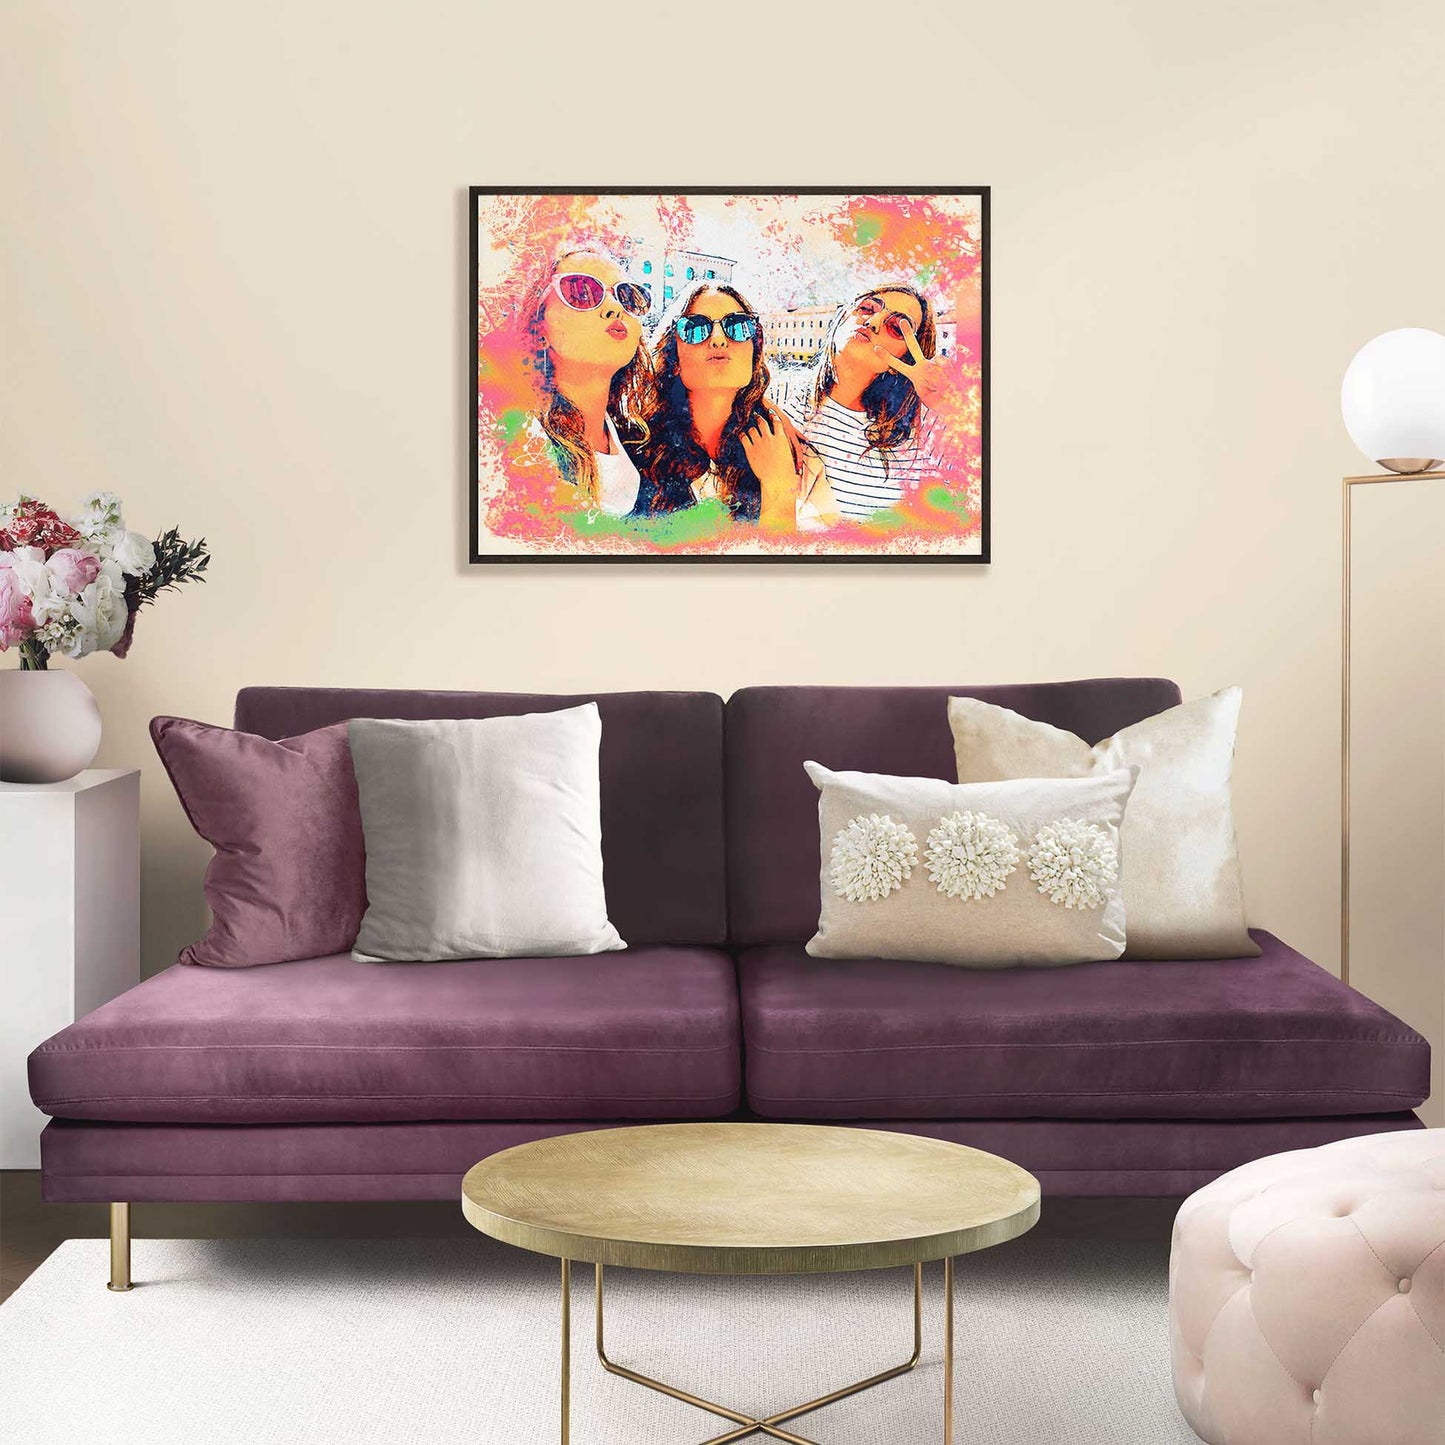 Freshen Up Your Space: Infuse your home with freshness and creativity through this personalised watercolour splash framed print. Its lively and original design breathes new life into any room, adding a fun and vibrant atmosphere